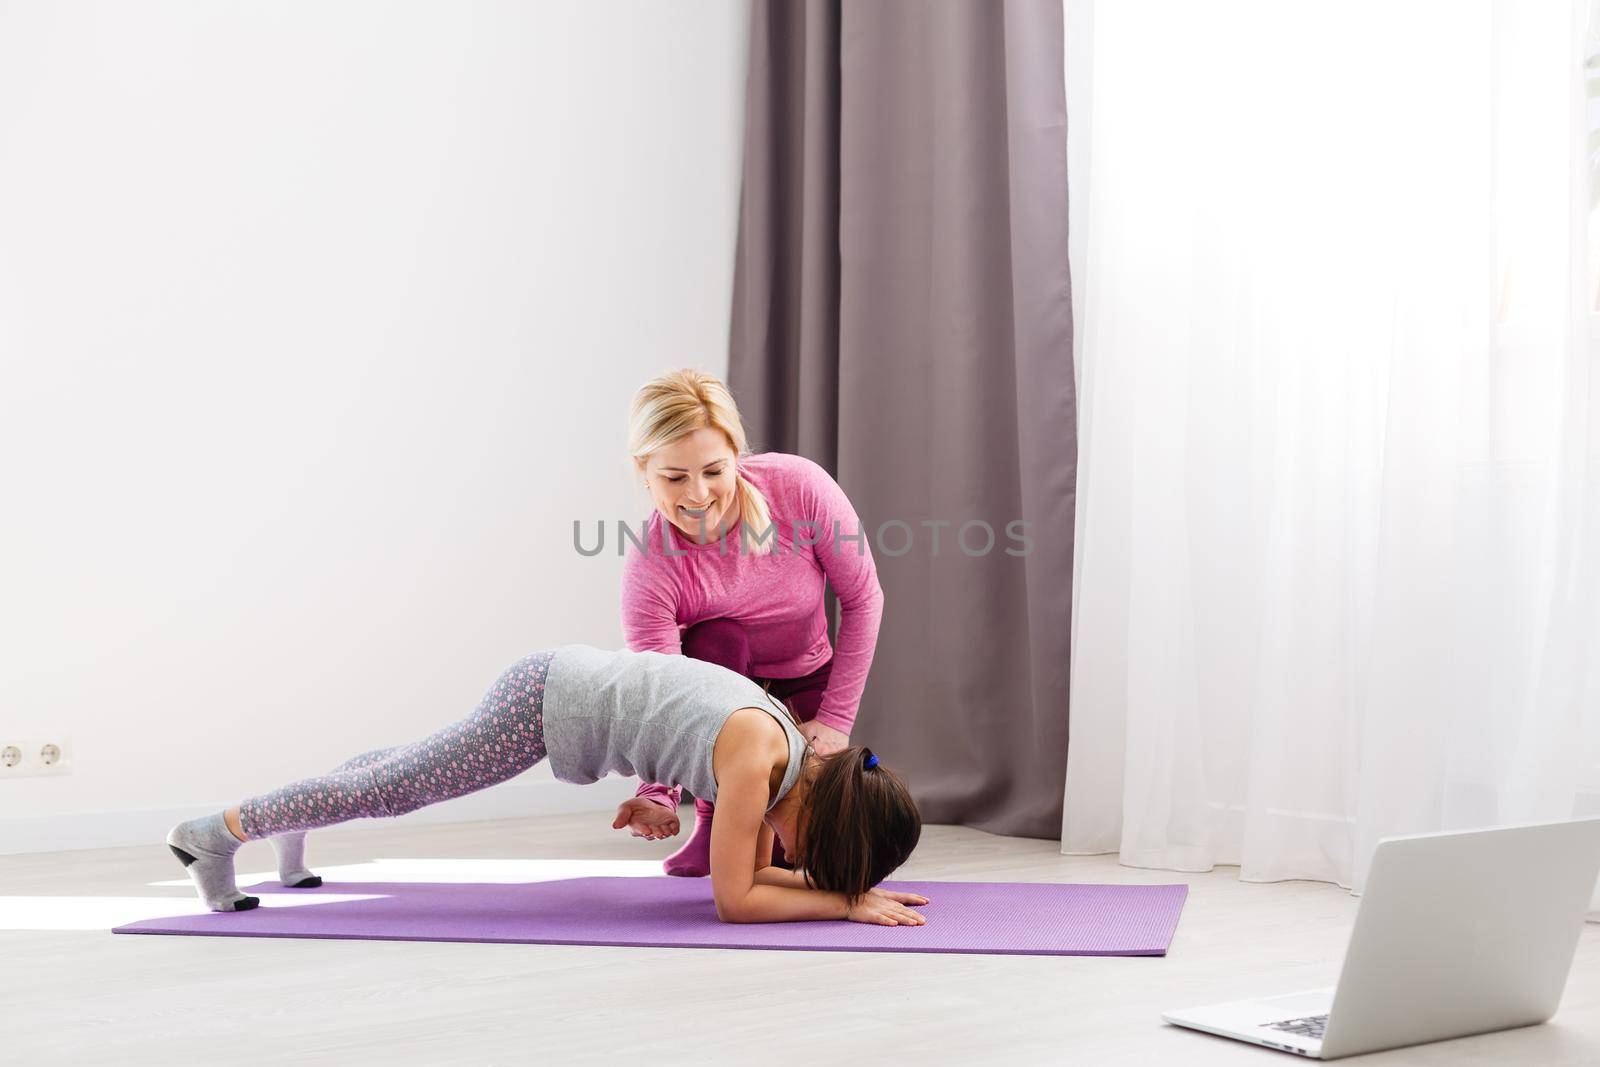 The girl does gymnastics at home. Gymnastics video tutorial. Gymnastic exercises. The idea for a children's activity in quarantine